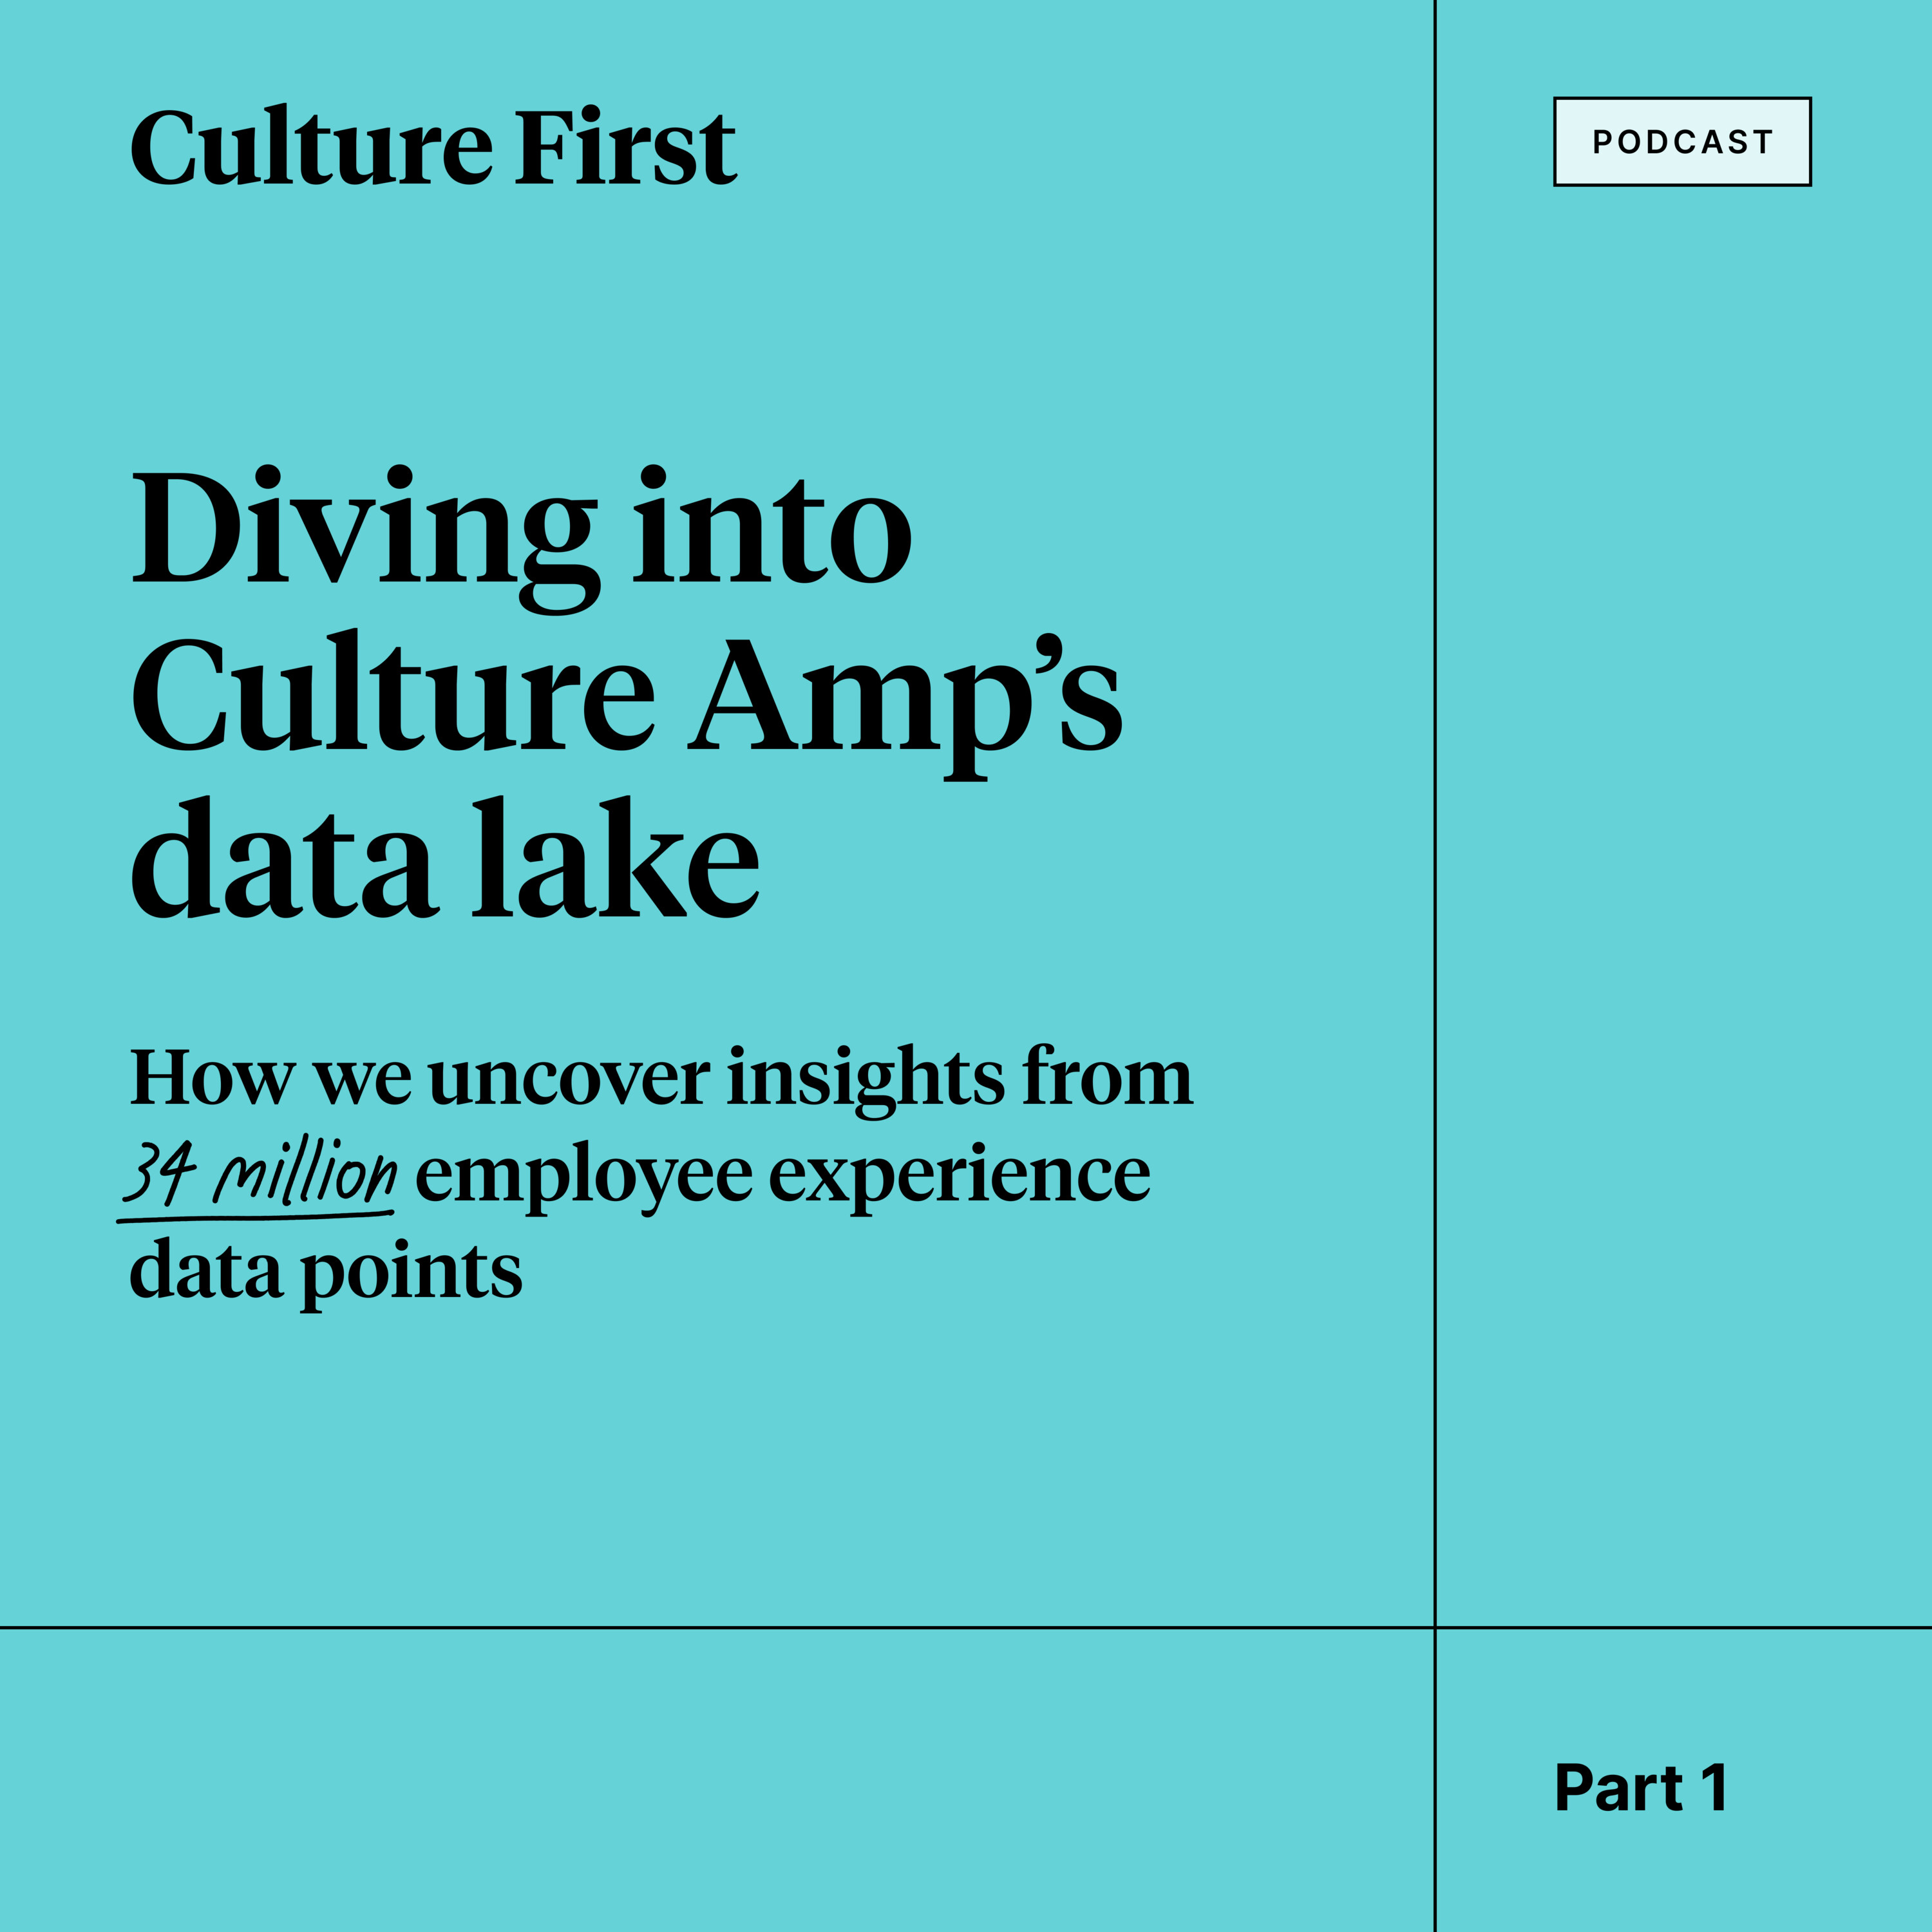 Diving into Culture Amp's data lake - How we uncover insights from 34 million employee experience data points. 